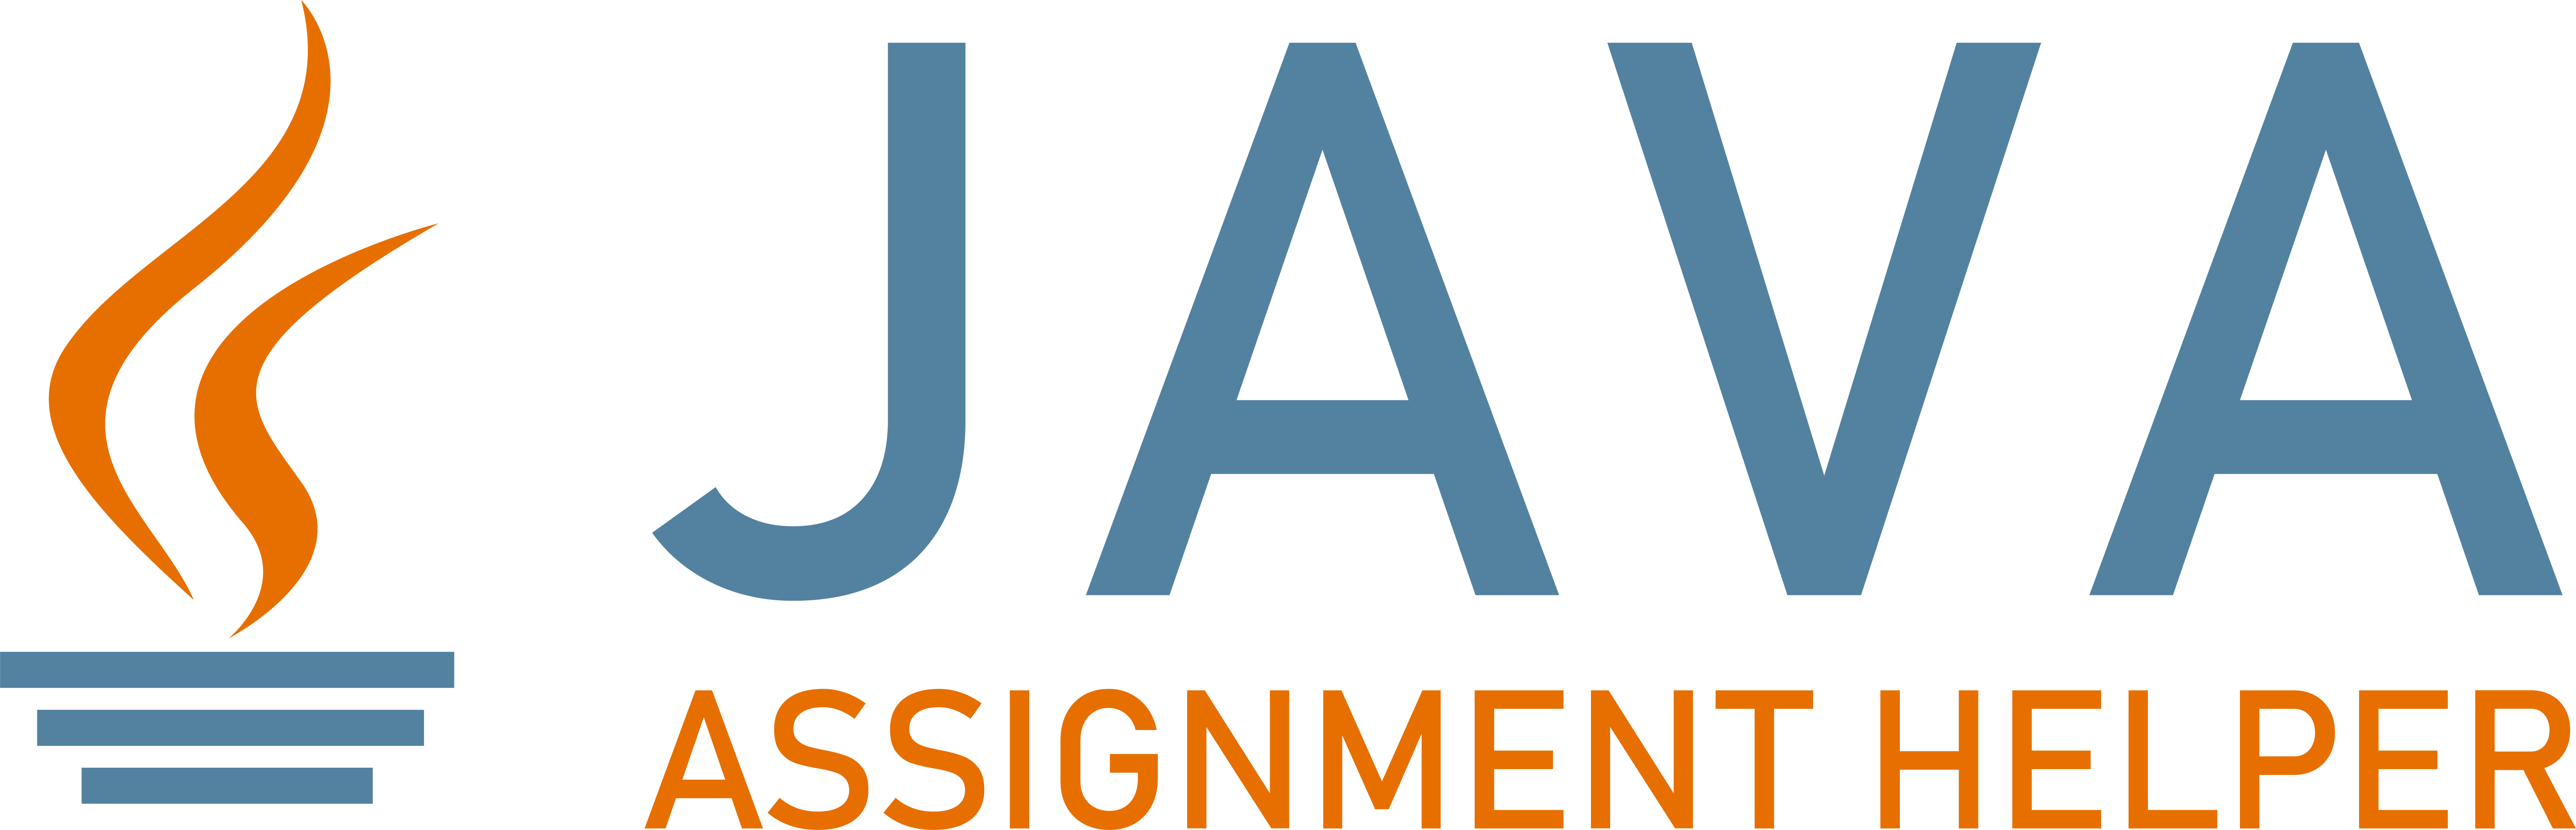 Hire Qualified Java Coders for Your Assignment